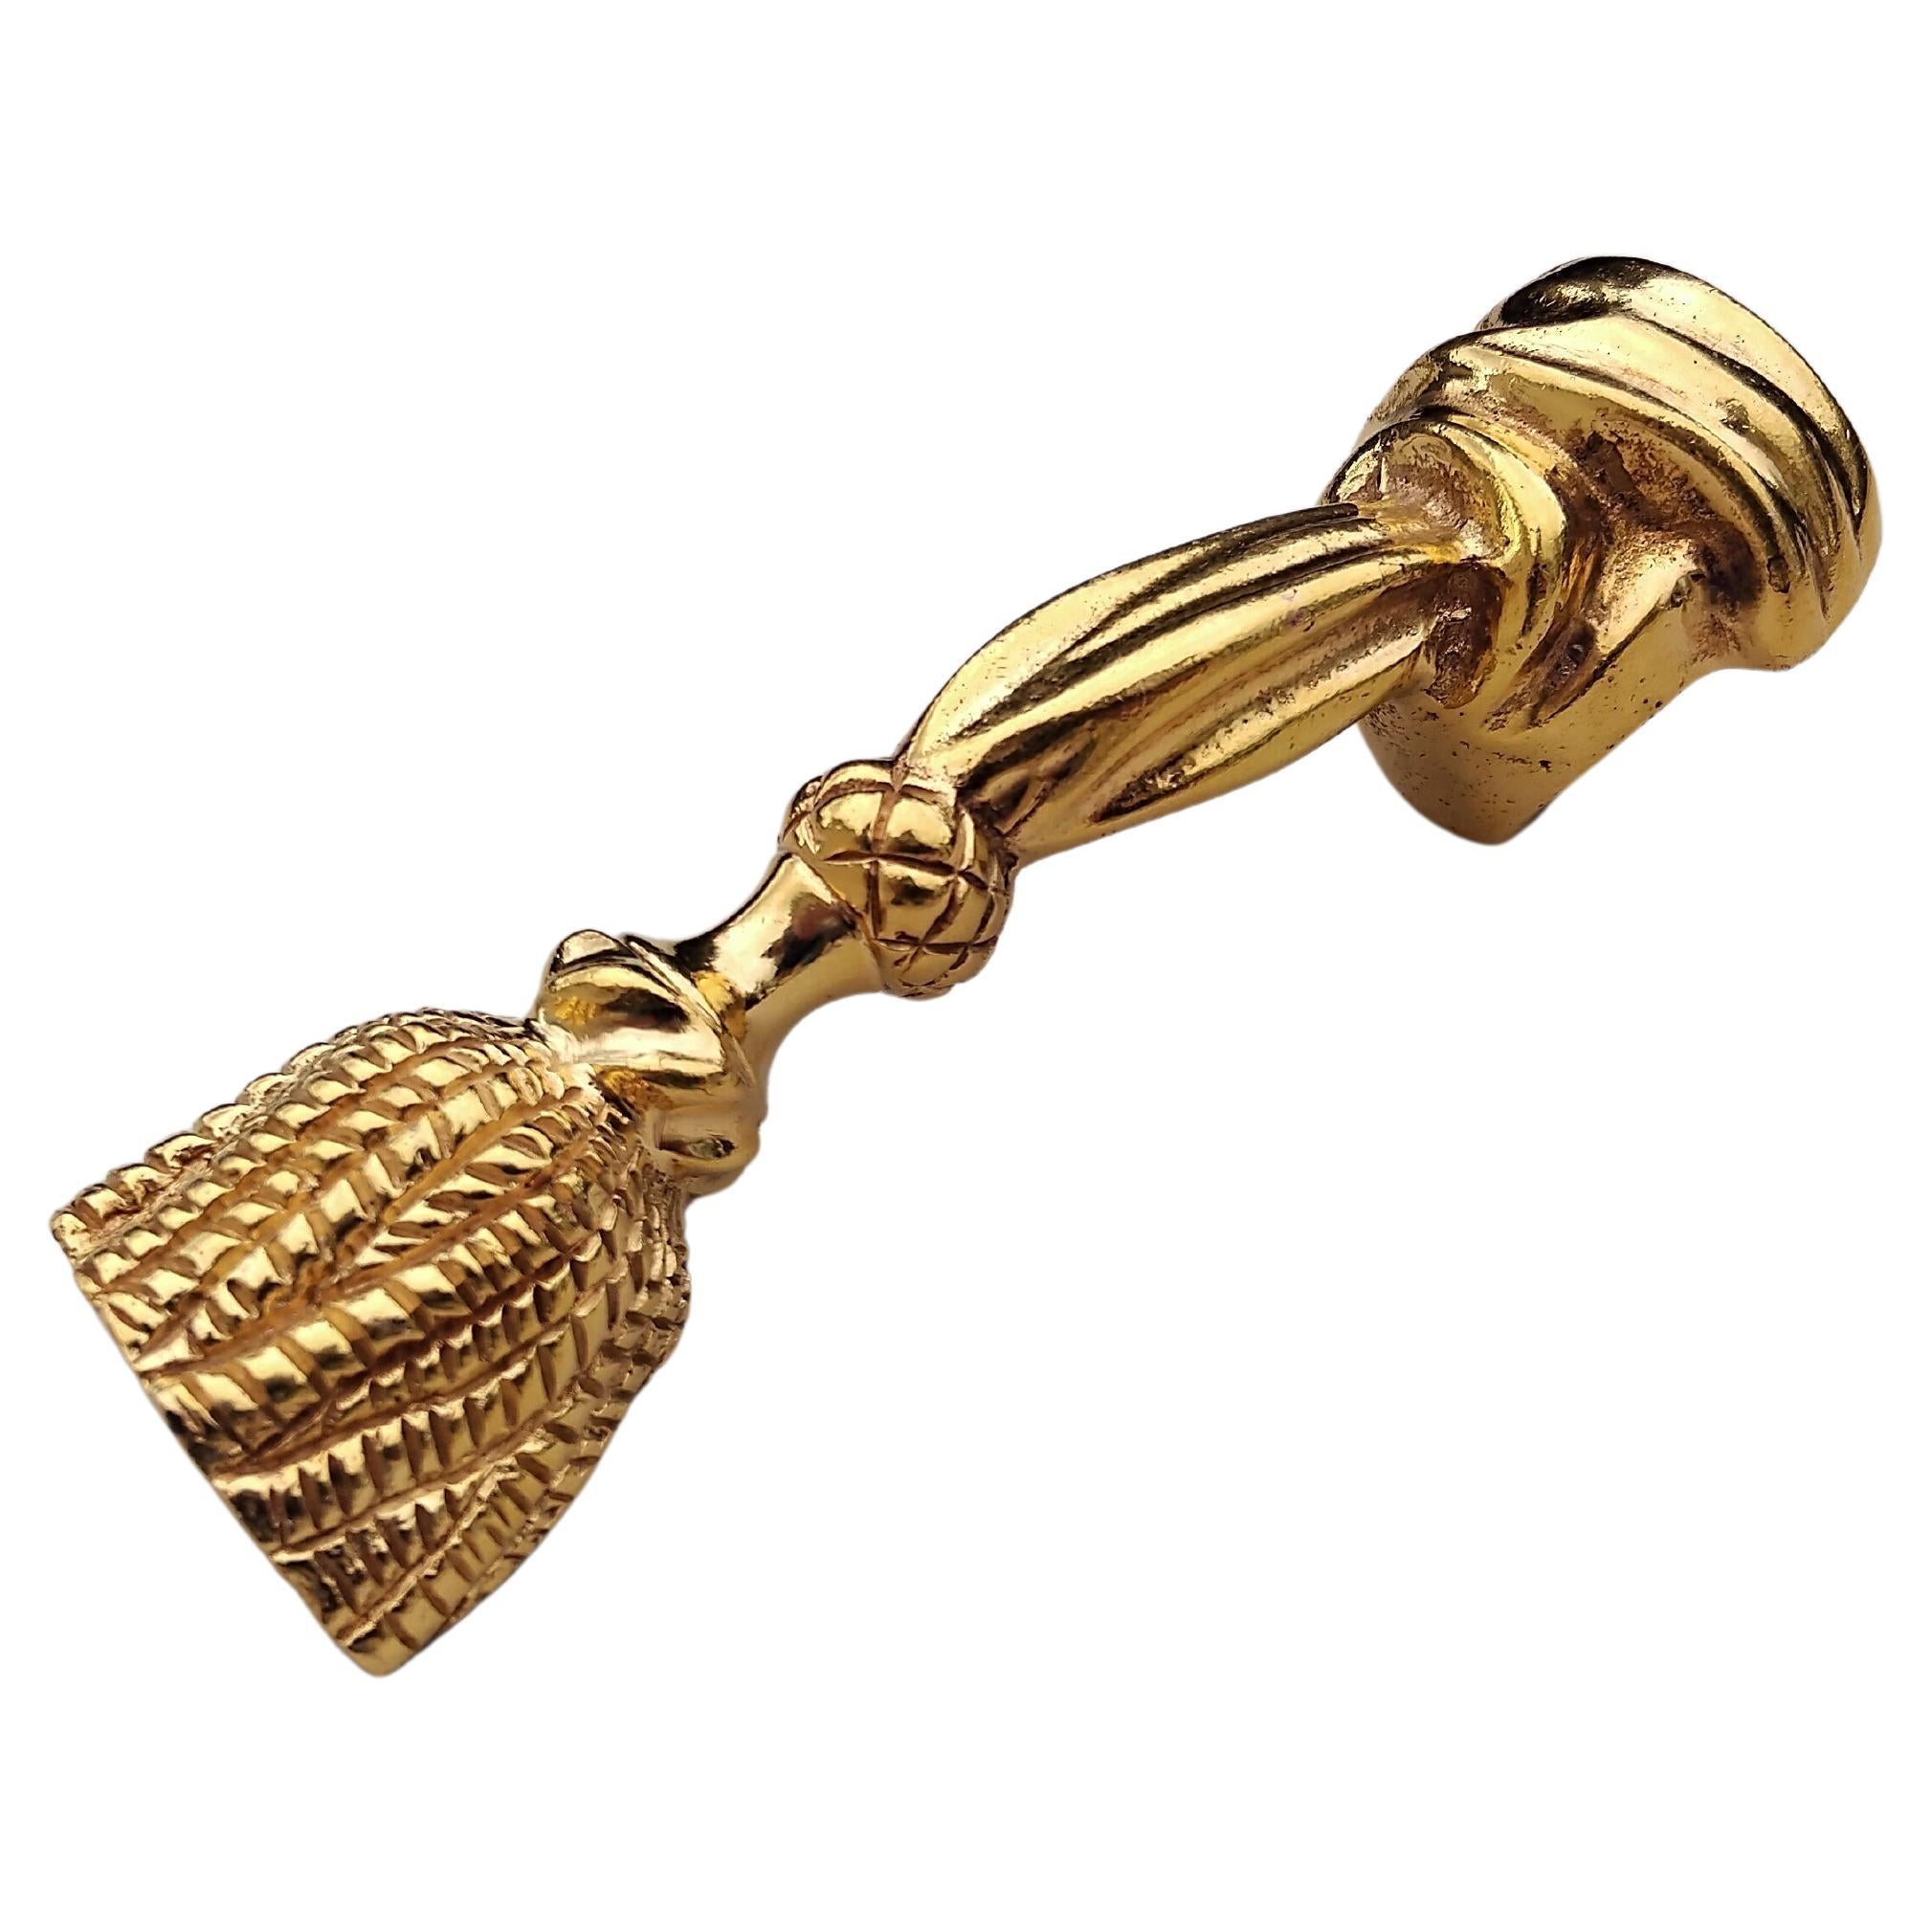 Rare and Beautiful Authentic Hermès Bottle Opener

In shape of a trimmings: pompom at the end, knot at the other end

Bottle opener part at back of the knot

Made of non-precious metal

Colorway: golden

